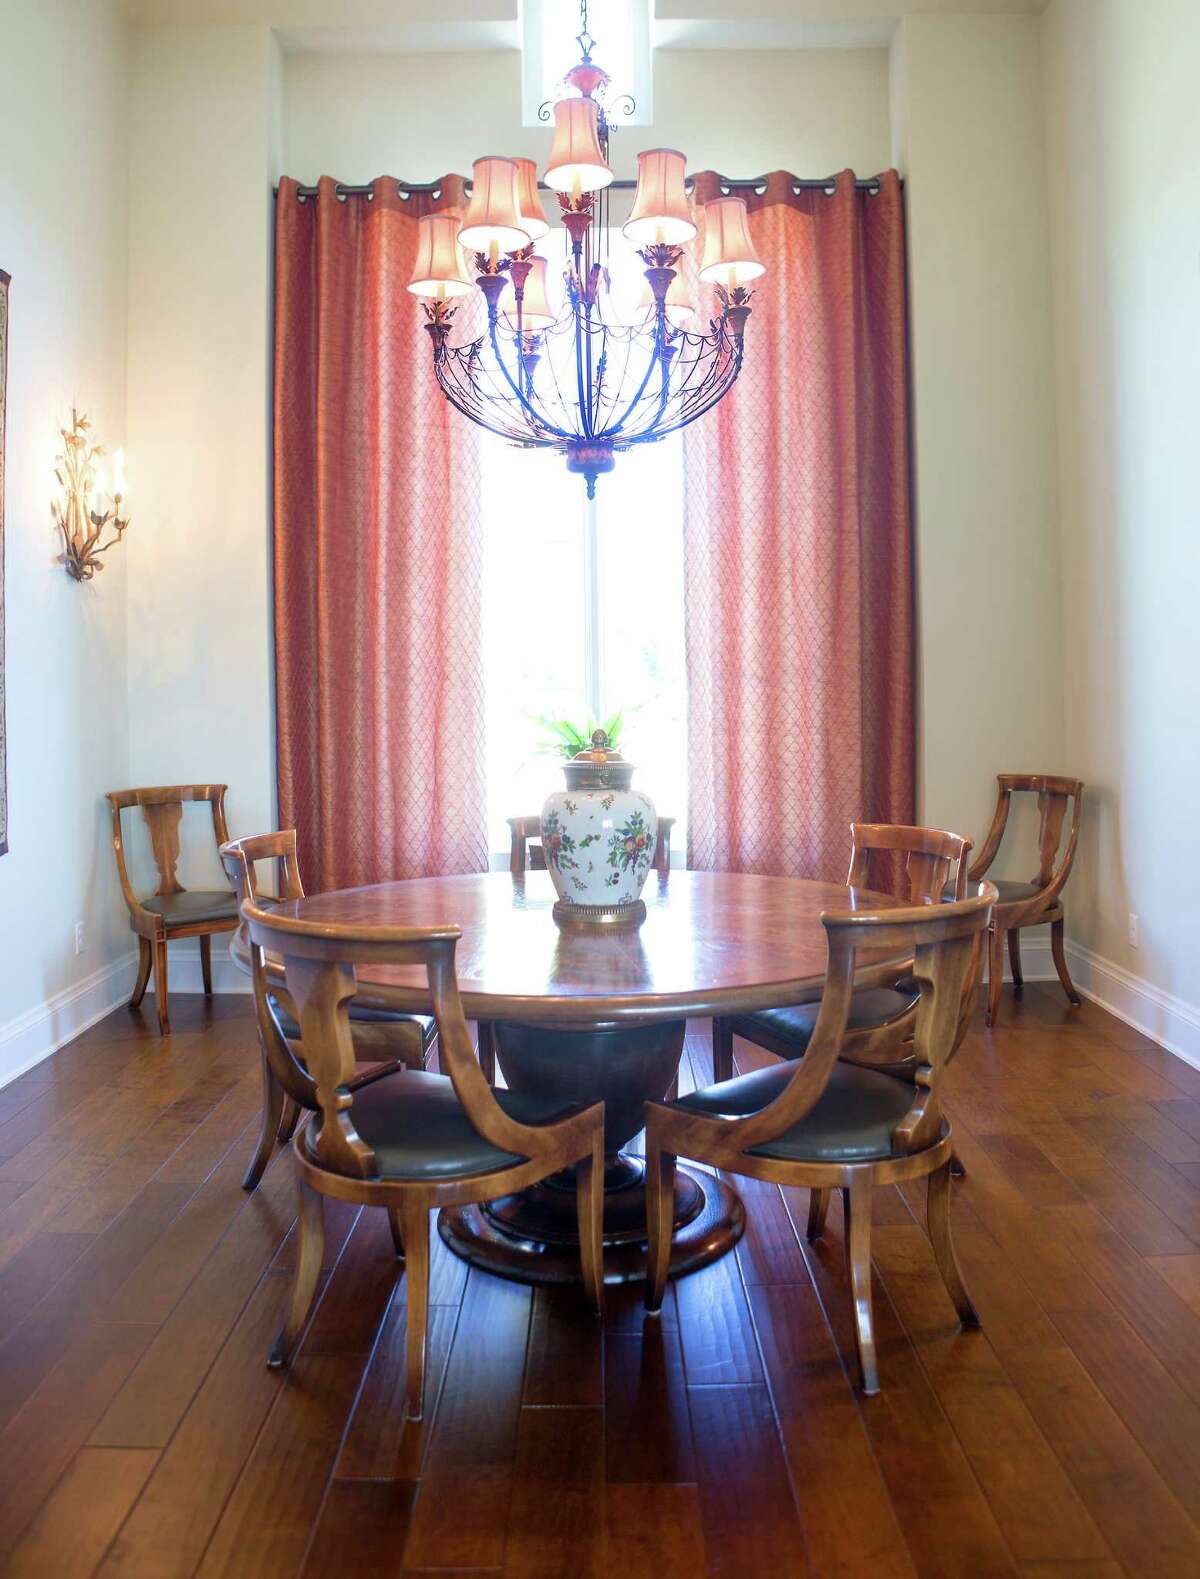 A dining area in Ladd’s Boerne-area home.